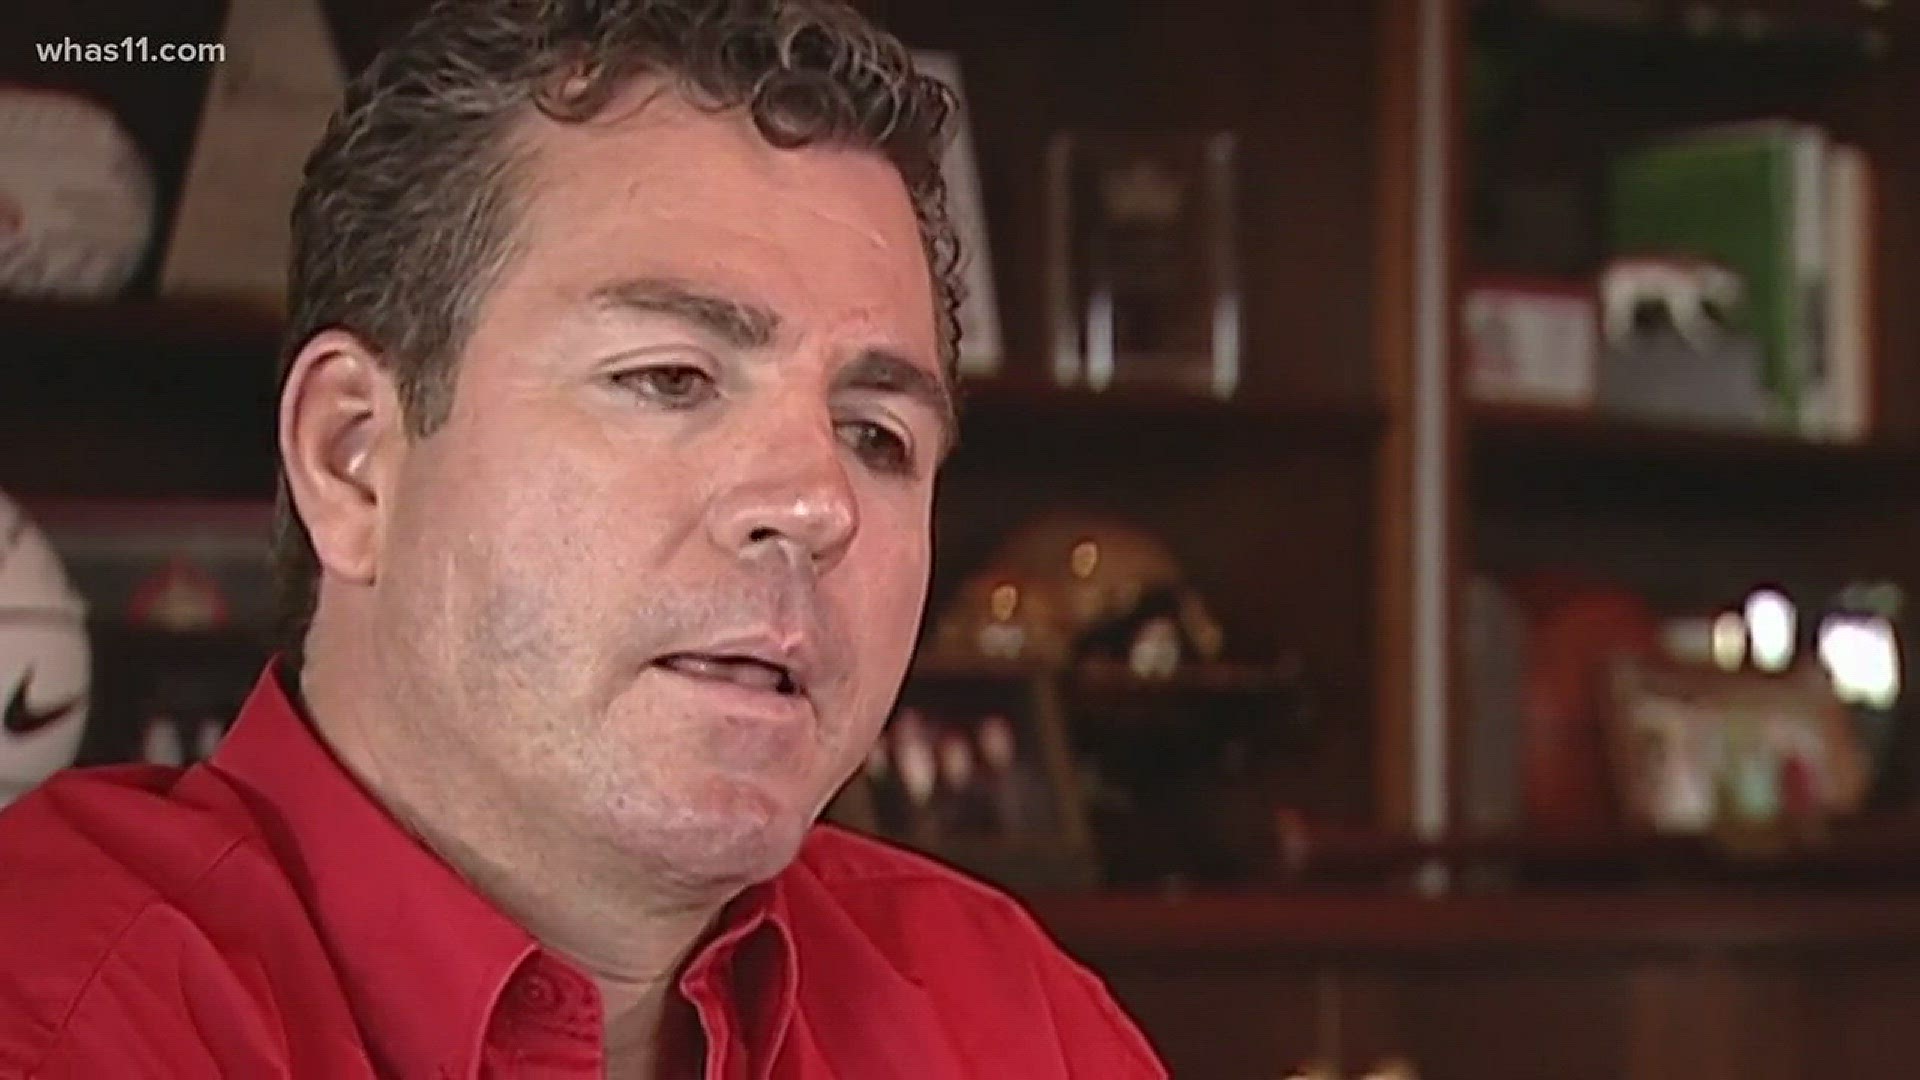 John Schnatter to step down as CEO in the new year